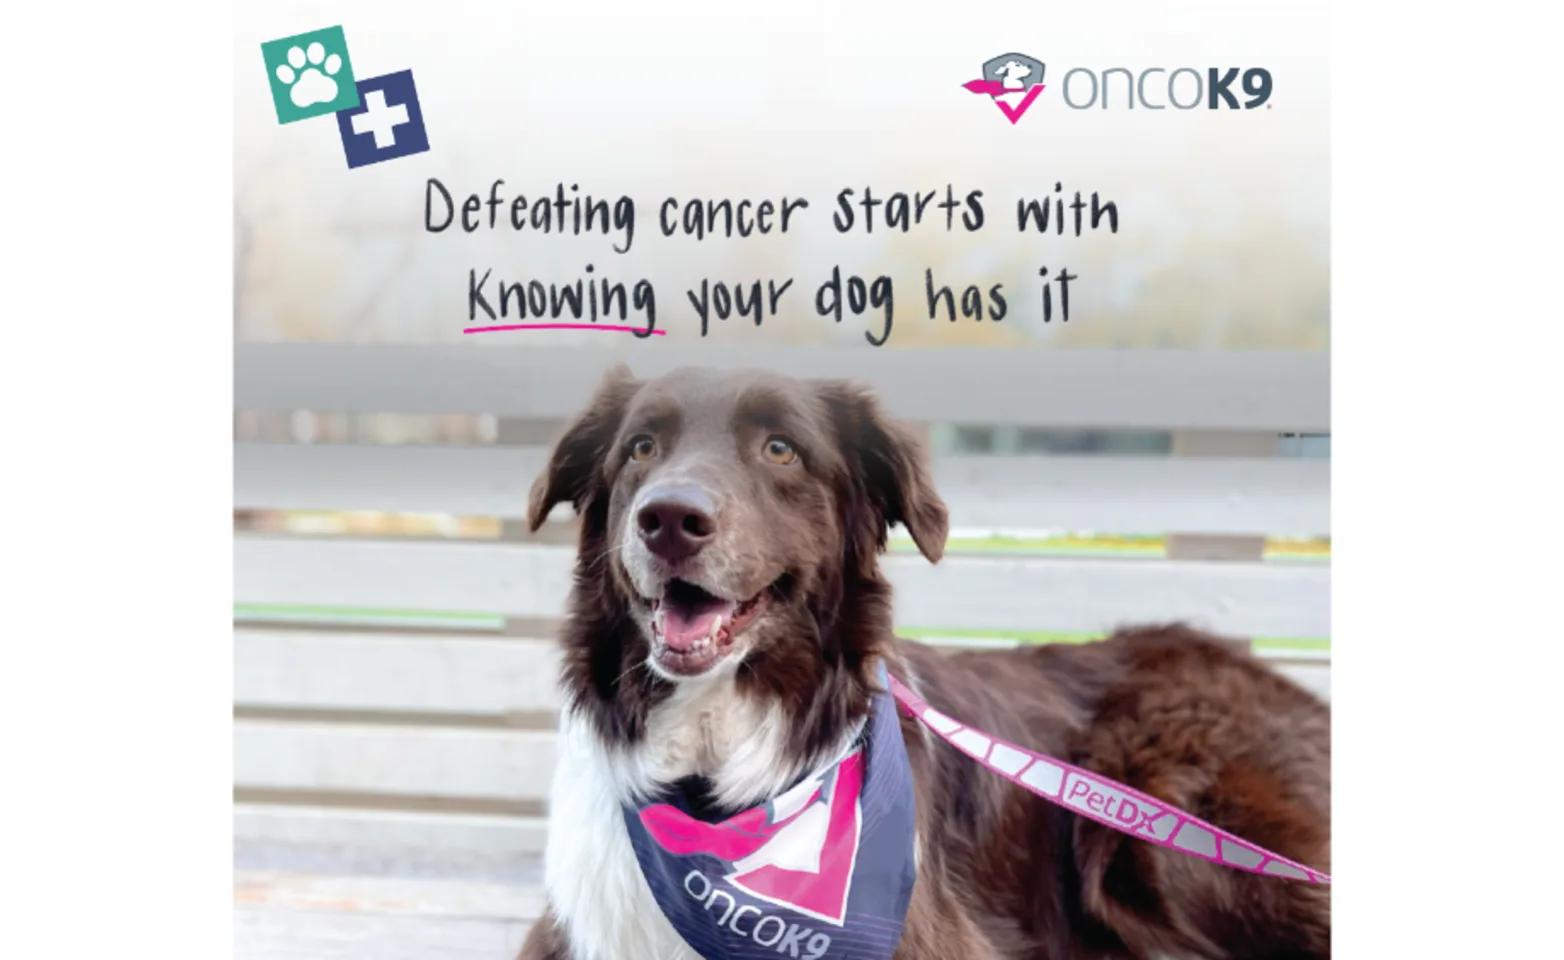 A graphic featuring the text, "Defeating cancer starts with knowing your dog has it" overlayed on an image of a brown and white dog sitting on a bench